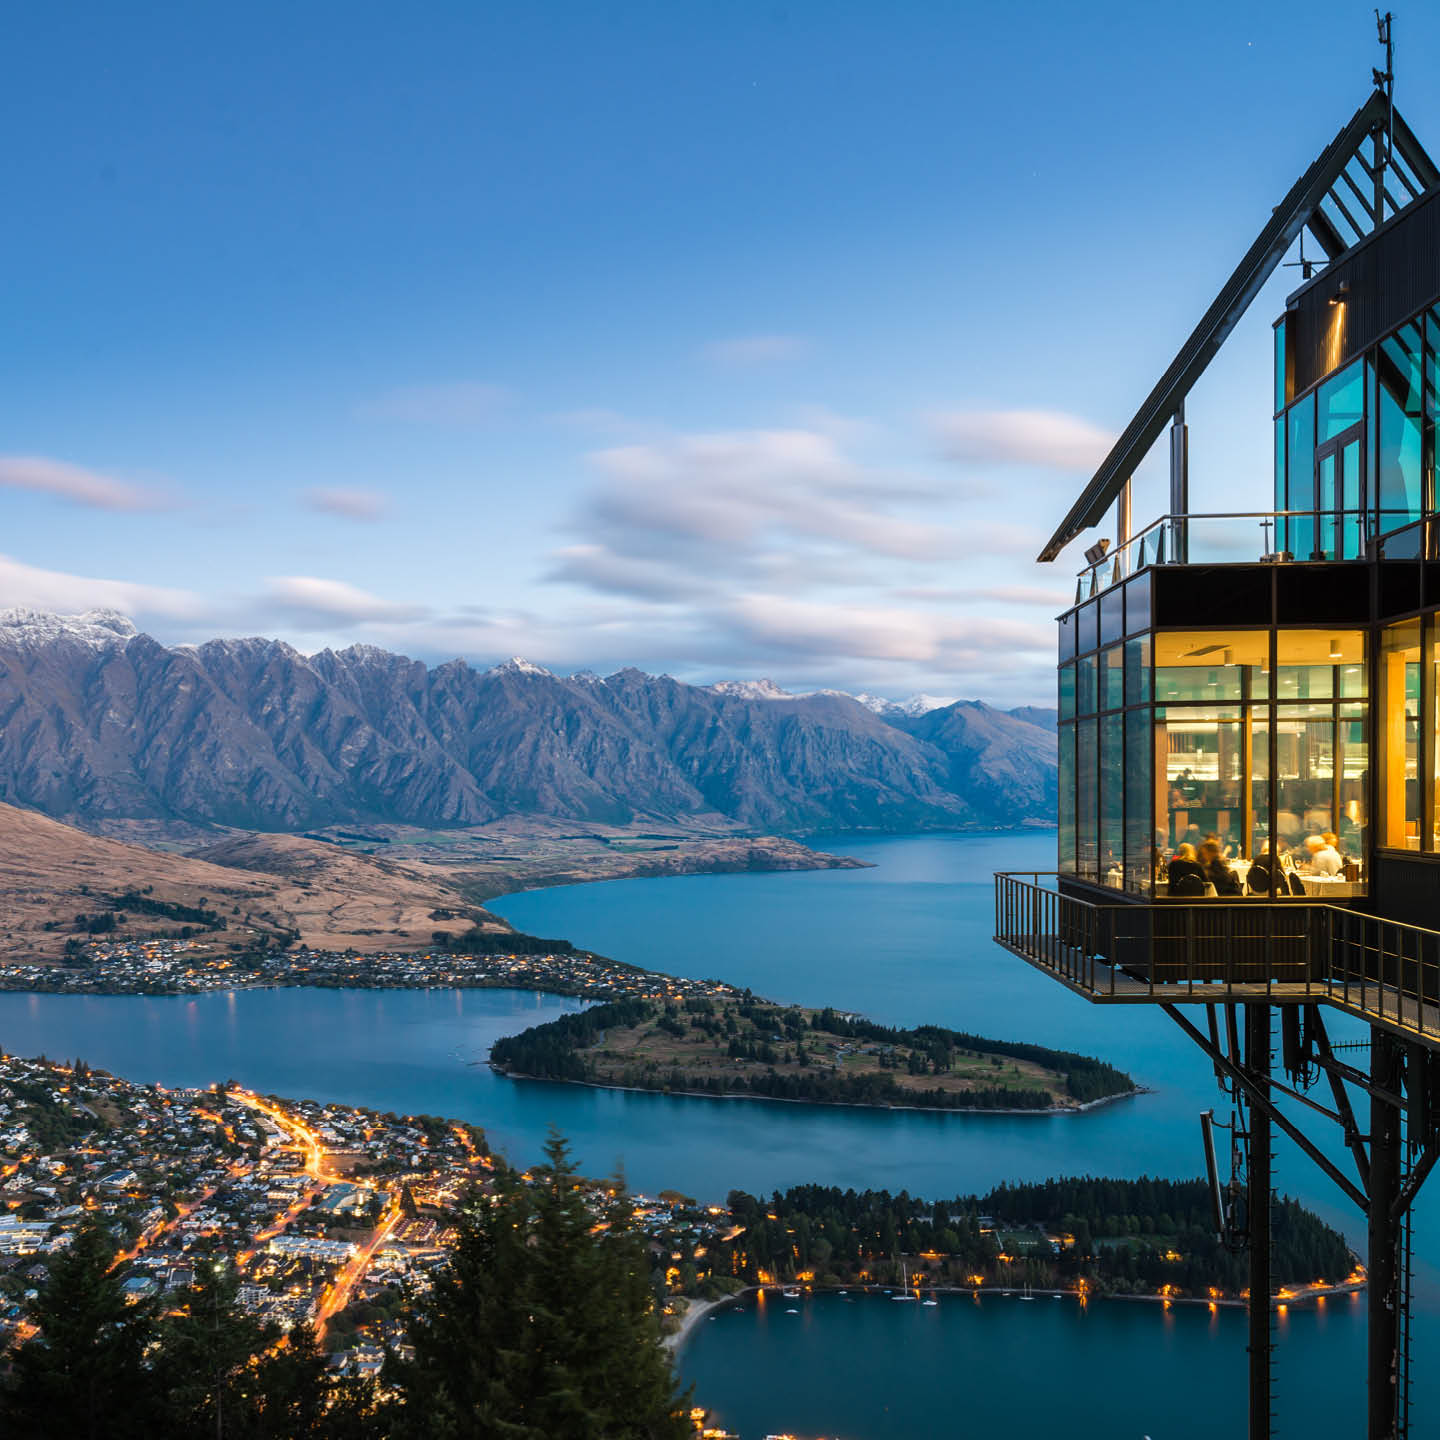 6 NIGHT ADELAIDE TO AUCKLAND CRUISE